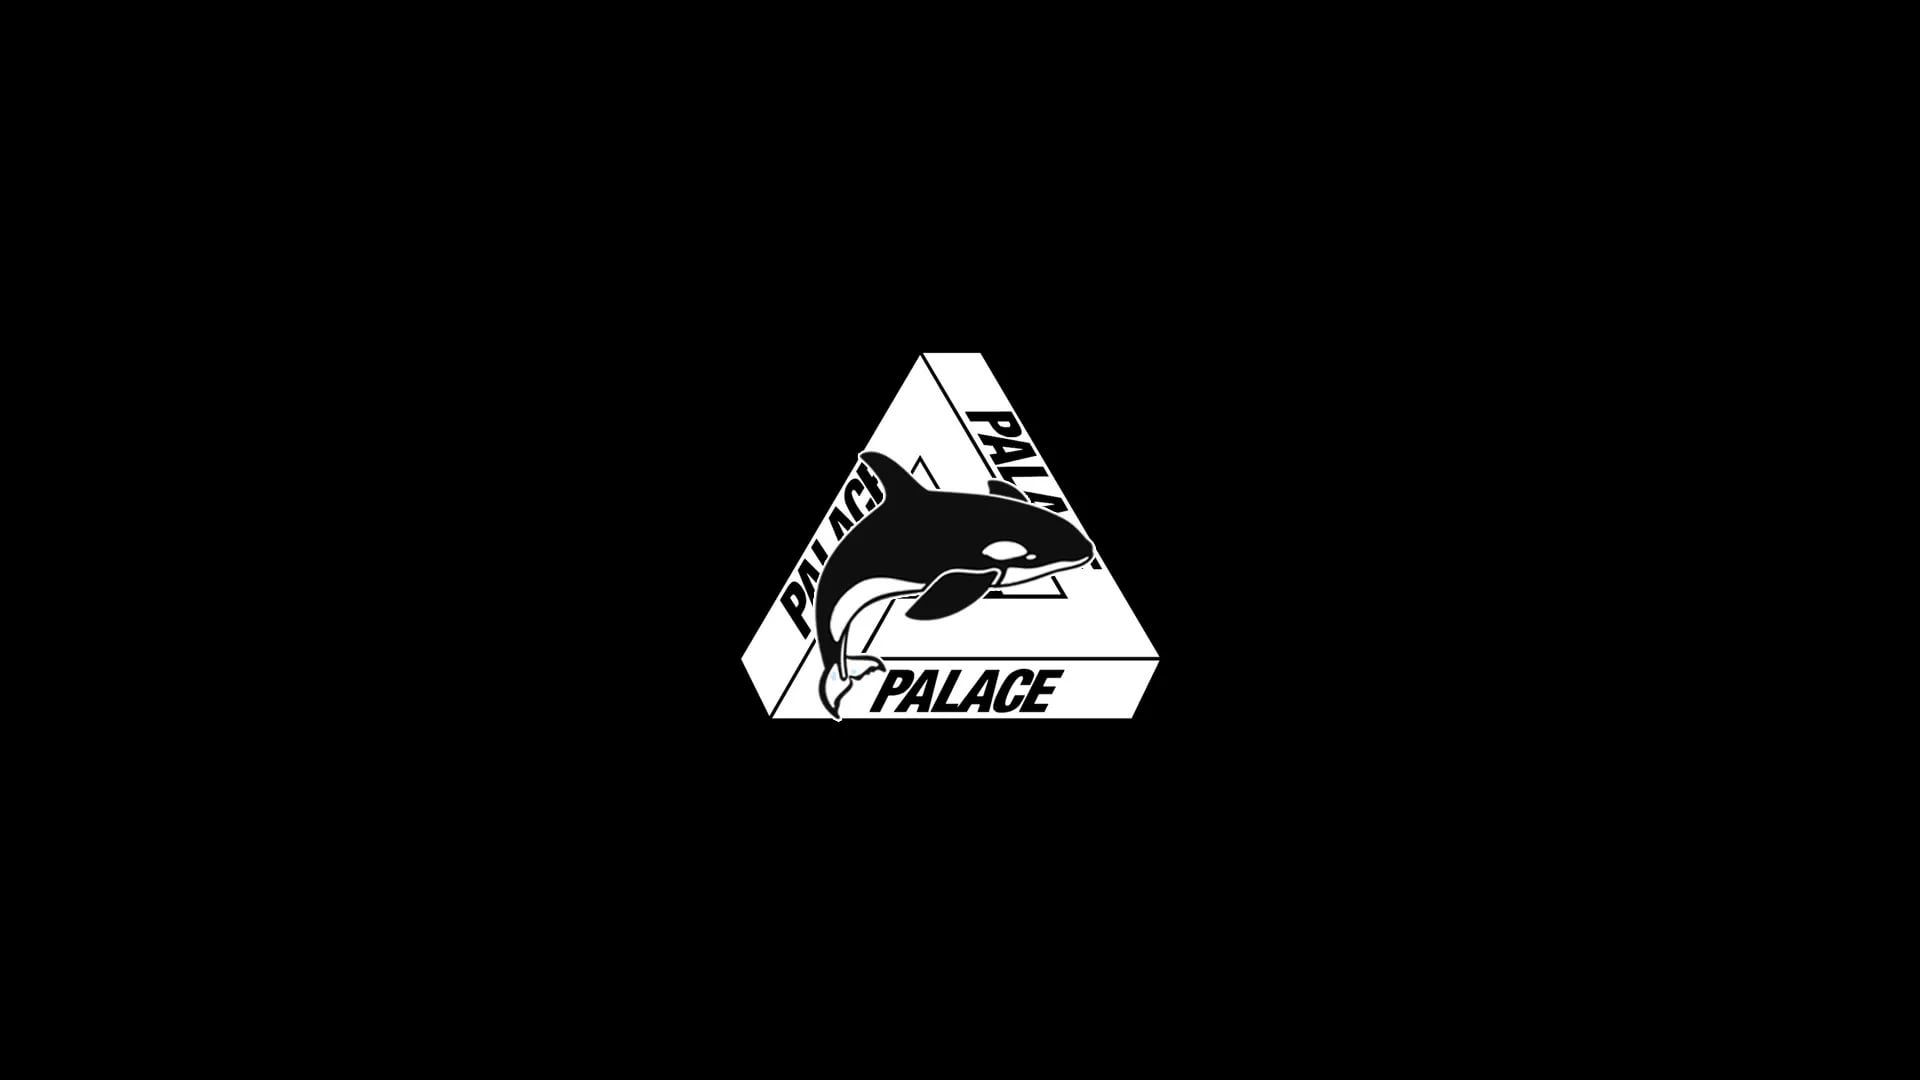 Palace Wallpapers